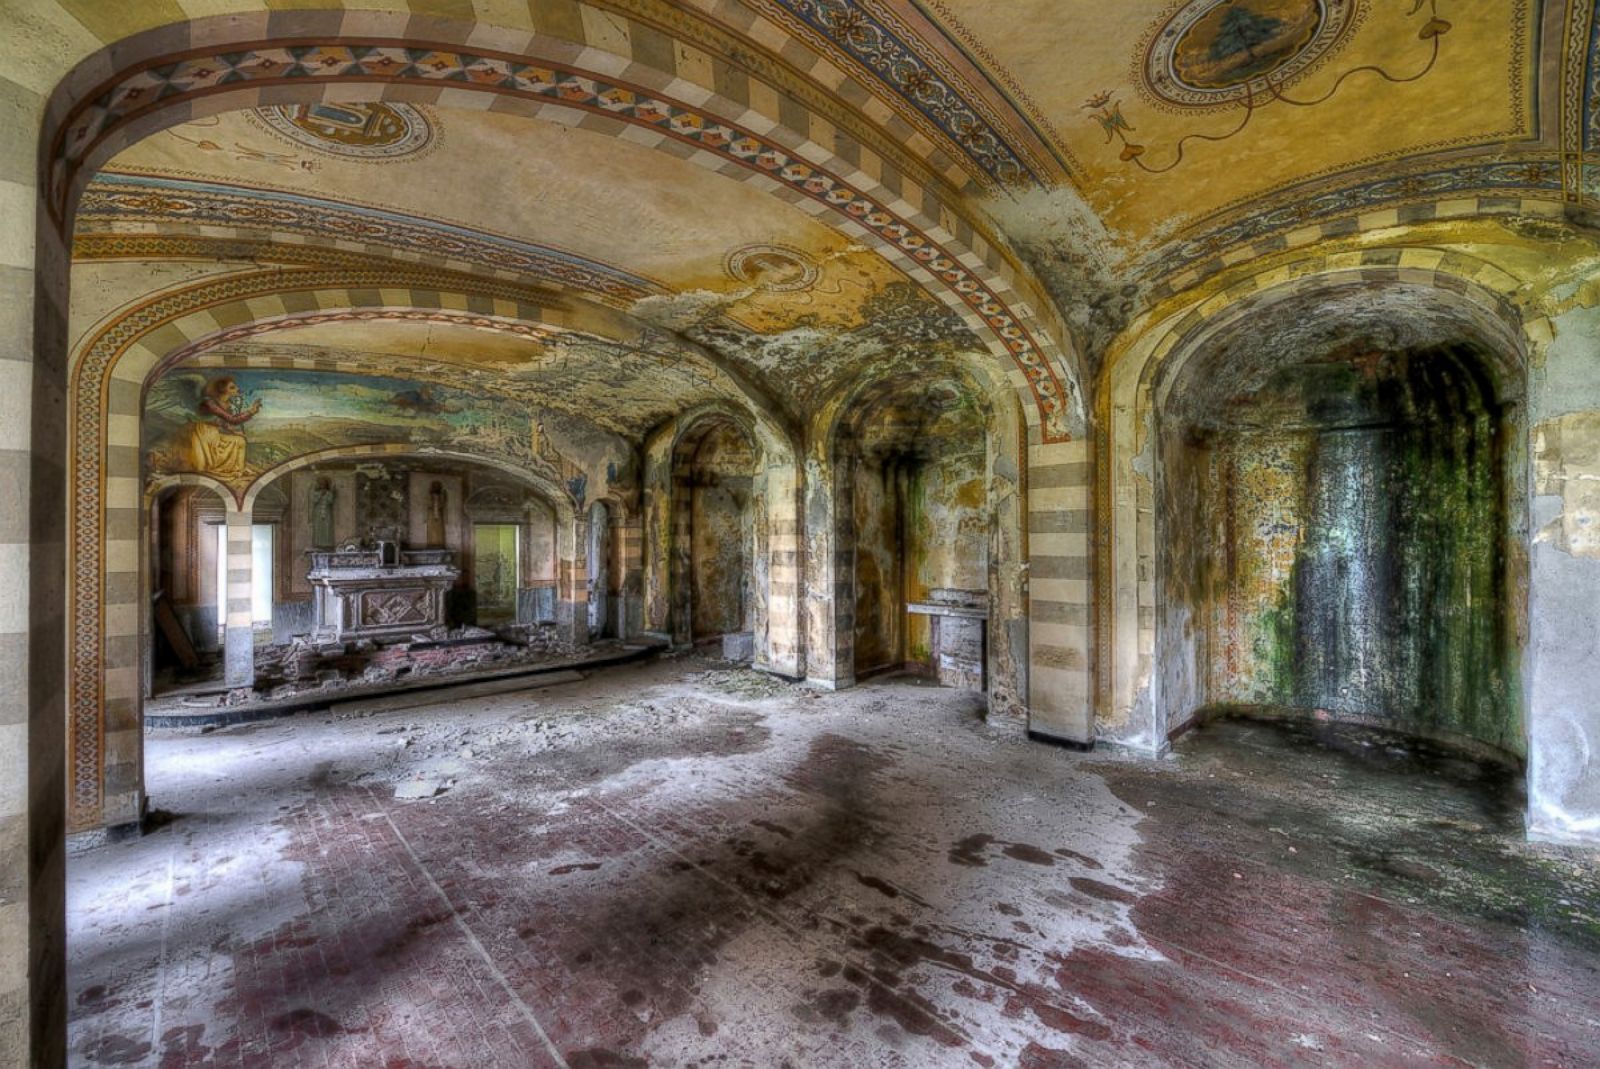 Images of These Abandoned Places Will Give You Chills Photos | Image #5 - ABC News